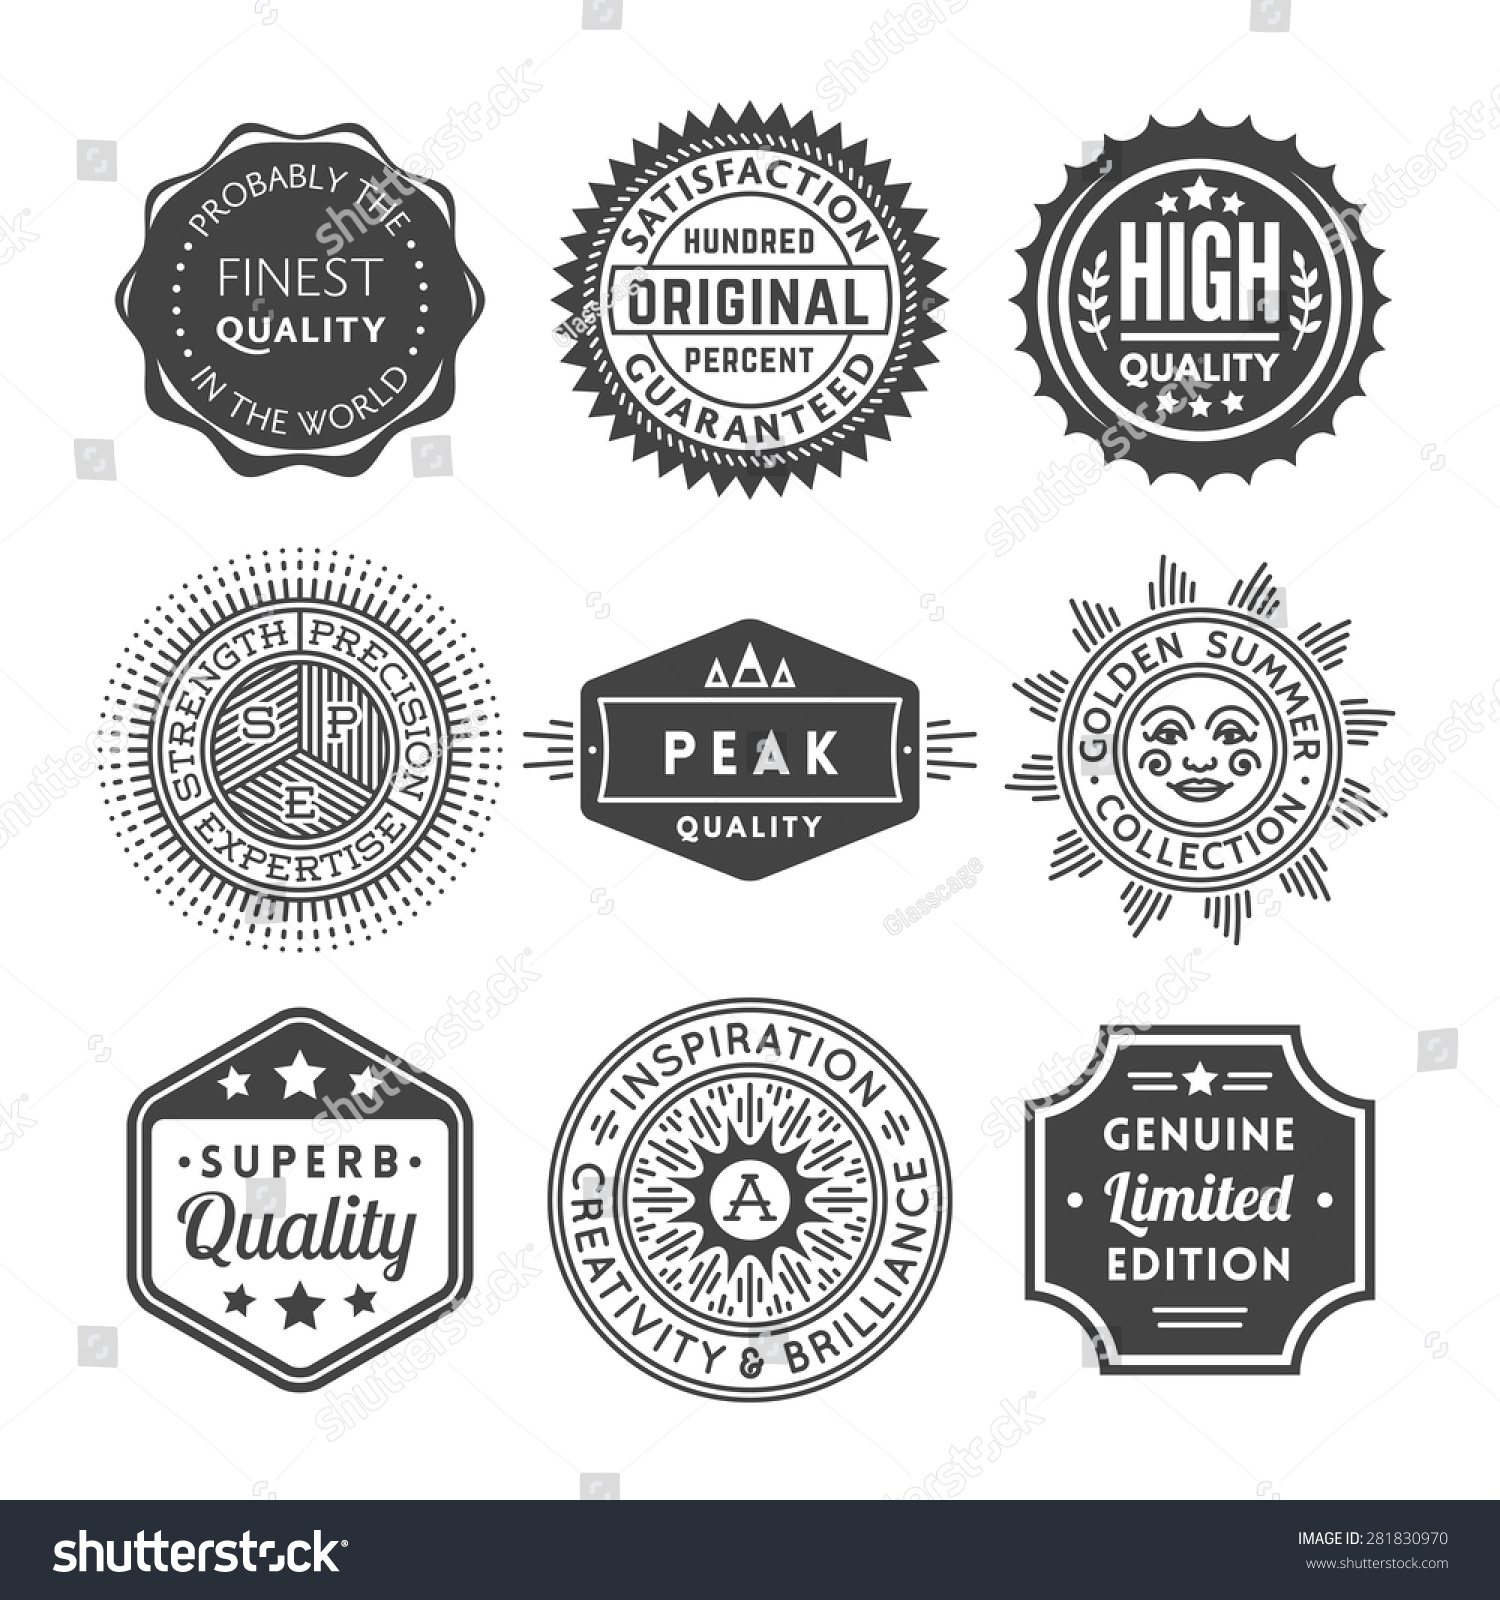 Finest Quality Vintage Seals, Labels and Badges Collection #281830970